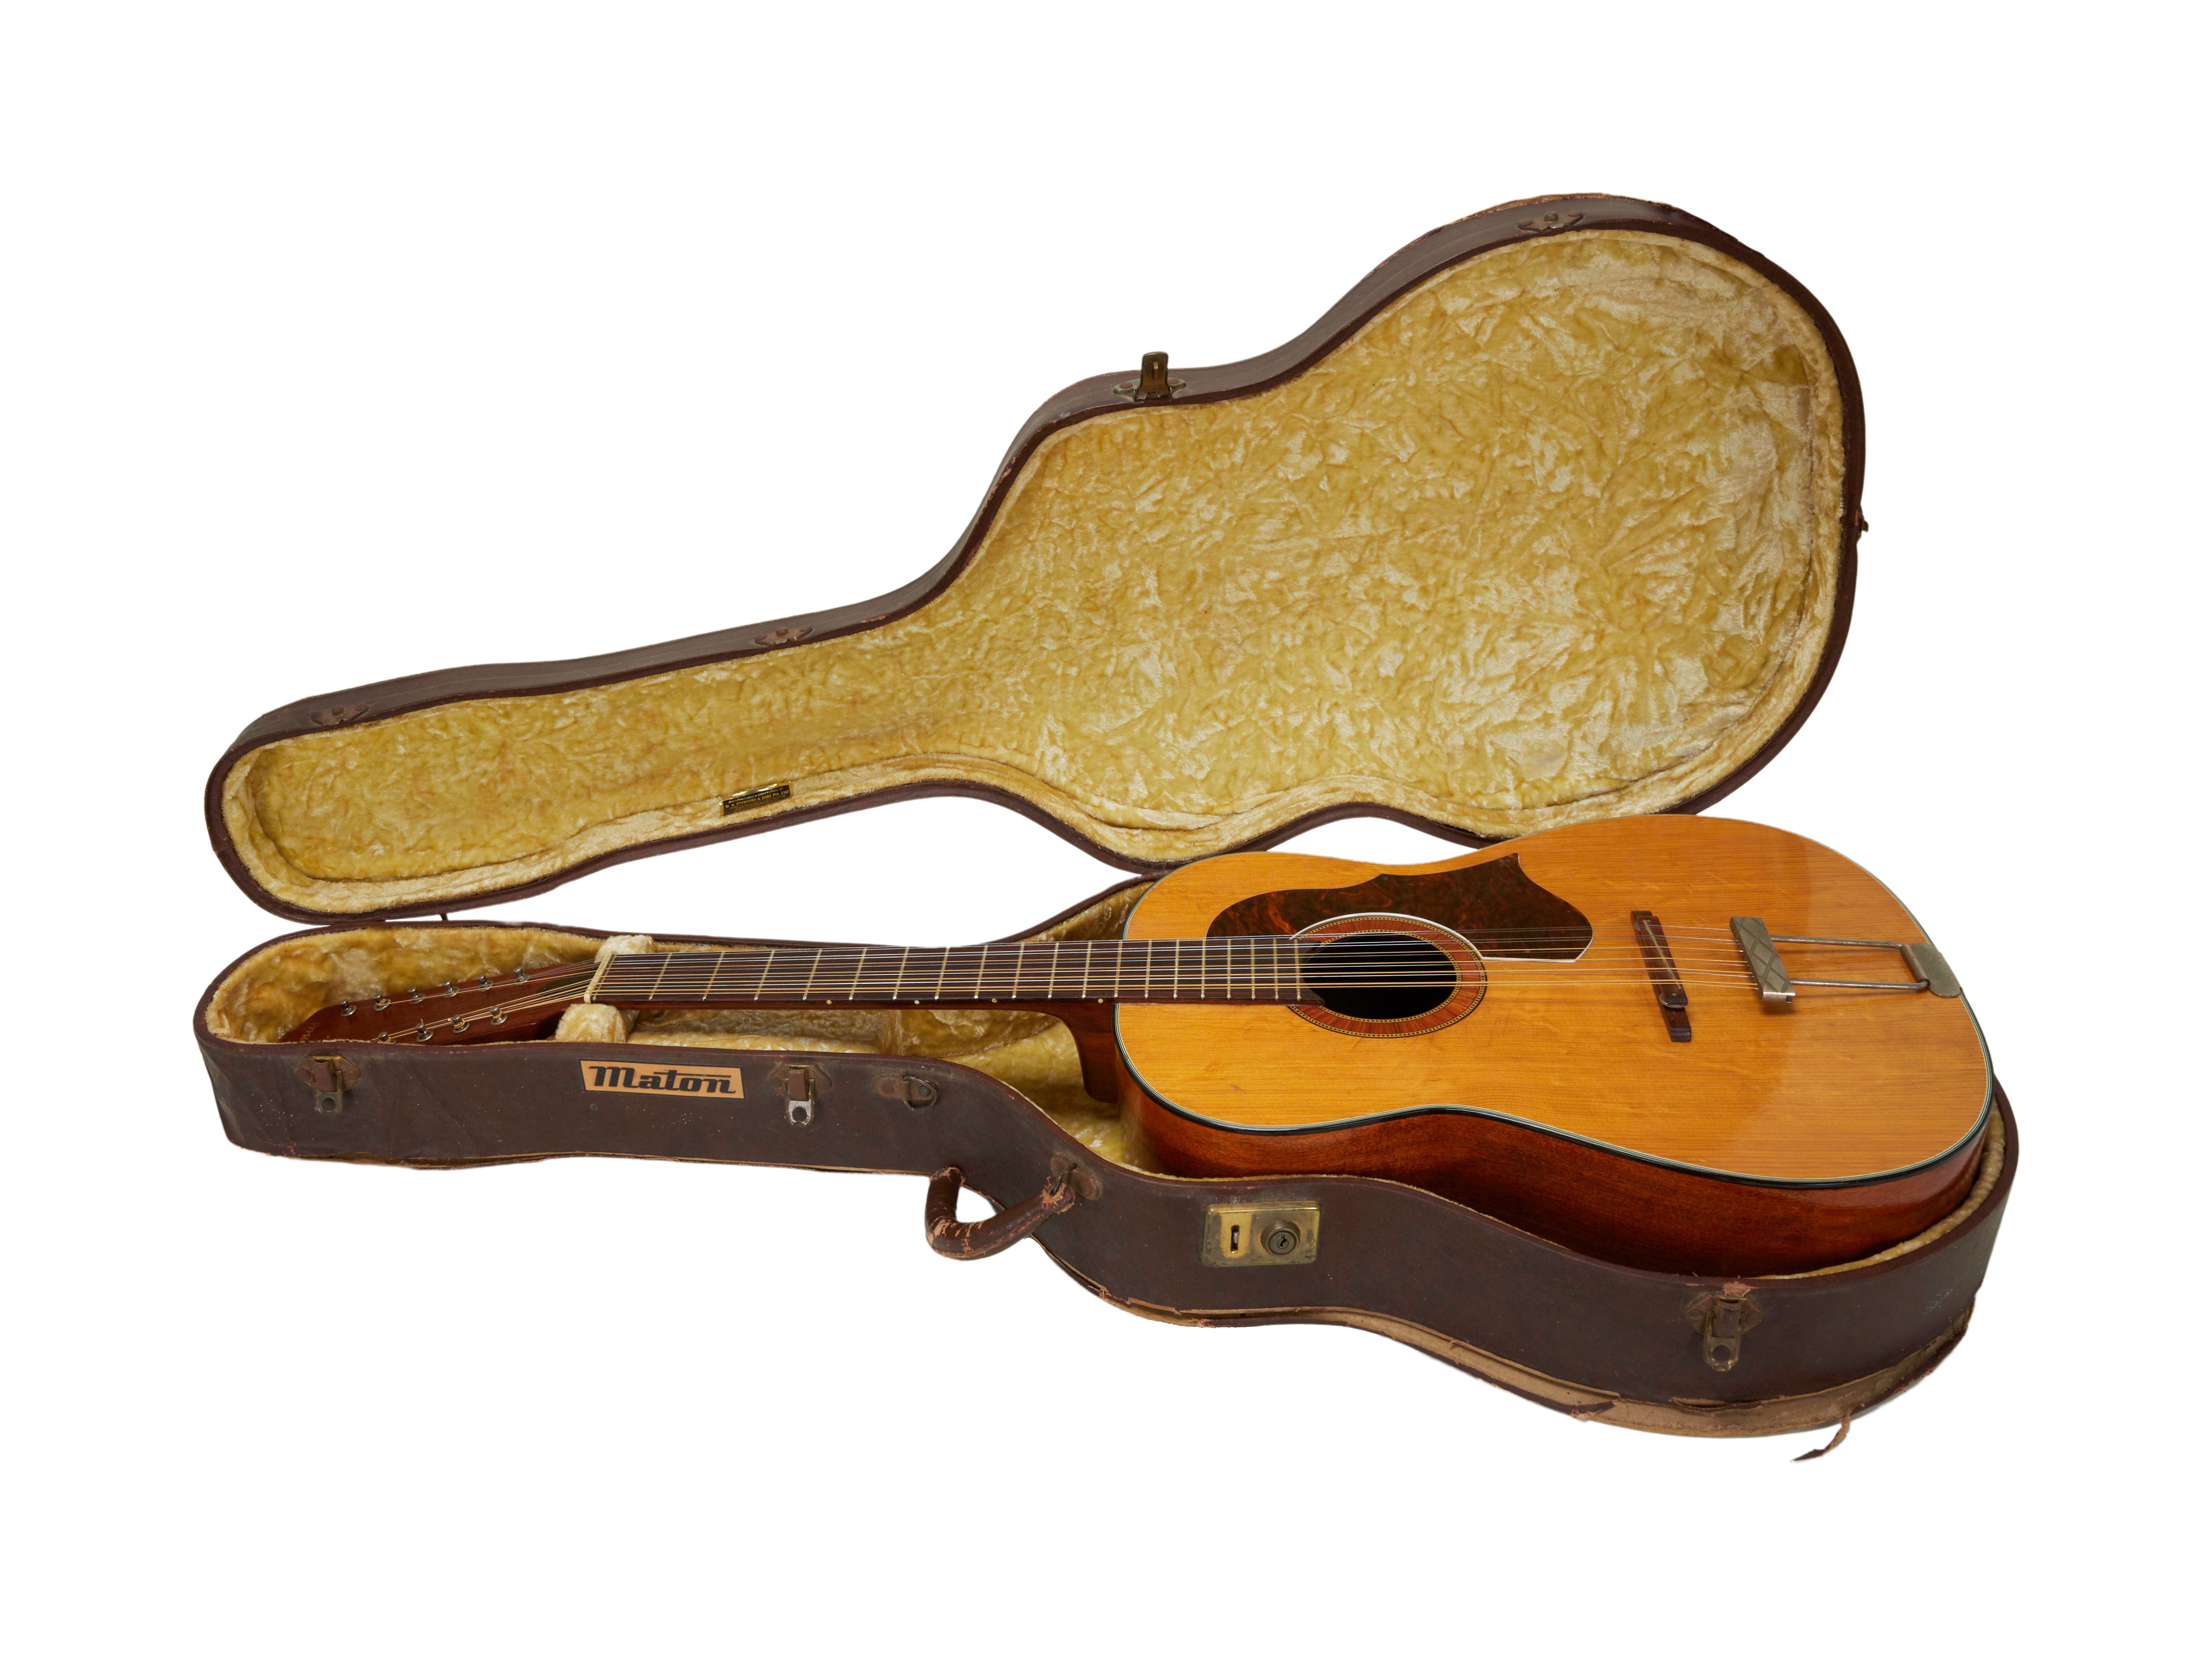 John Lennon's lost 'Help!' guitar to be on display in Nashville before auction. How it was found